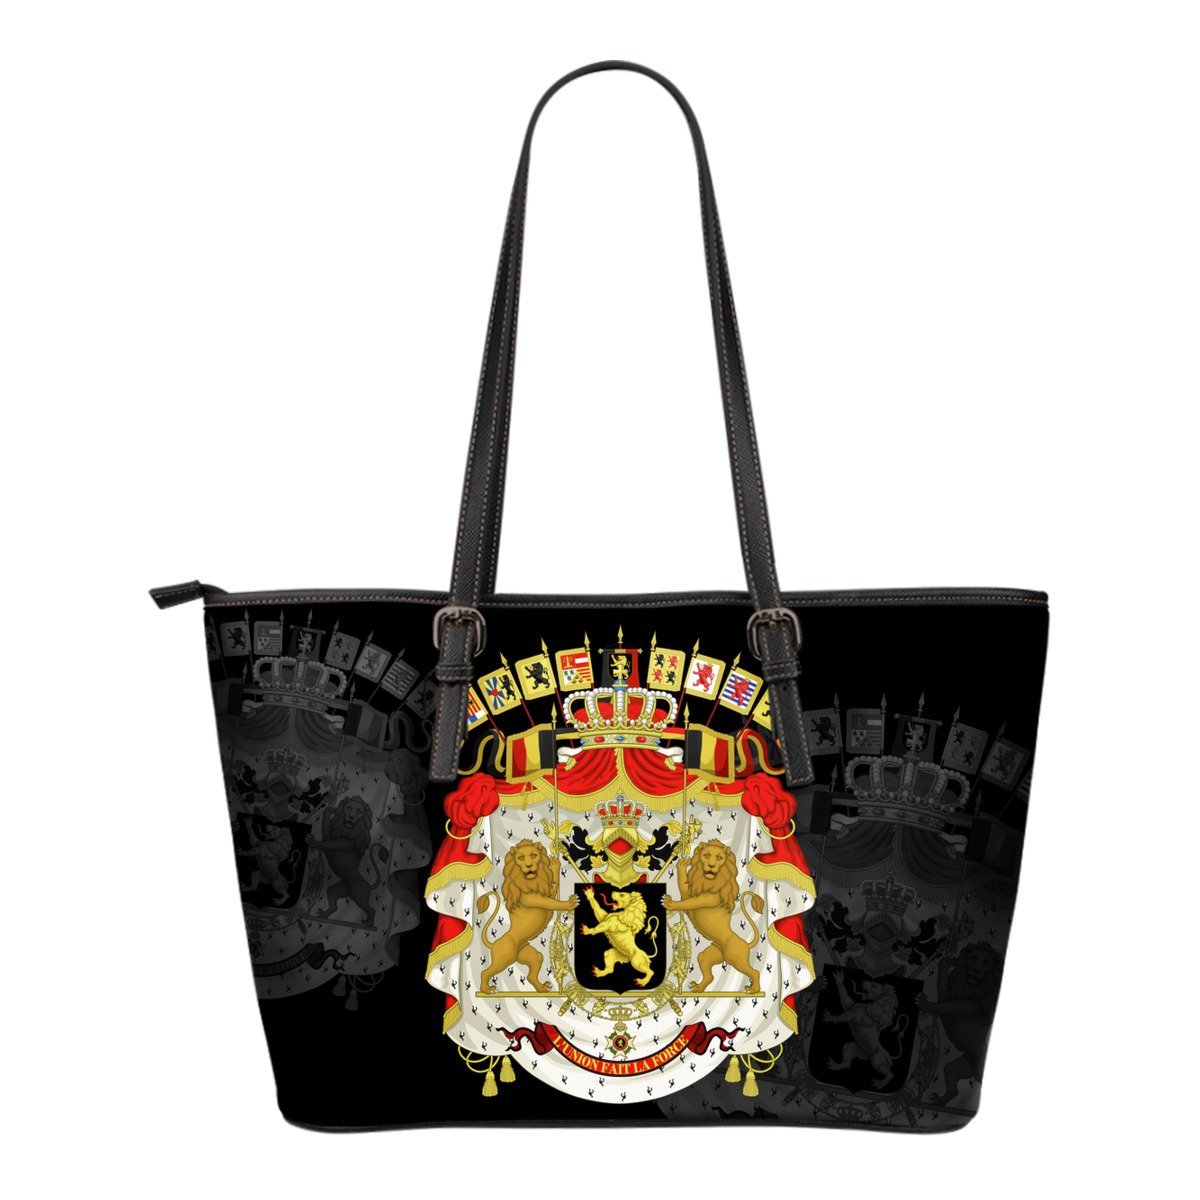 belgium-leather-tote-bag-small-size